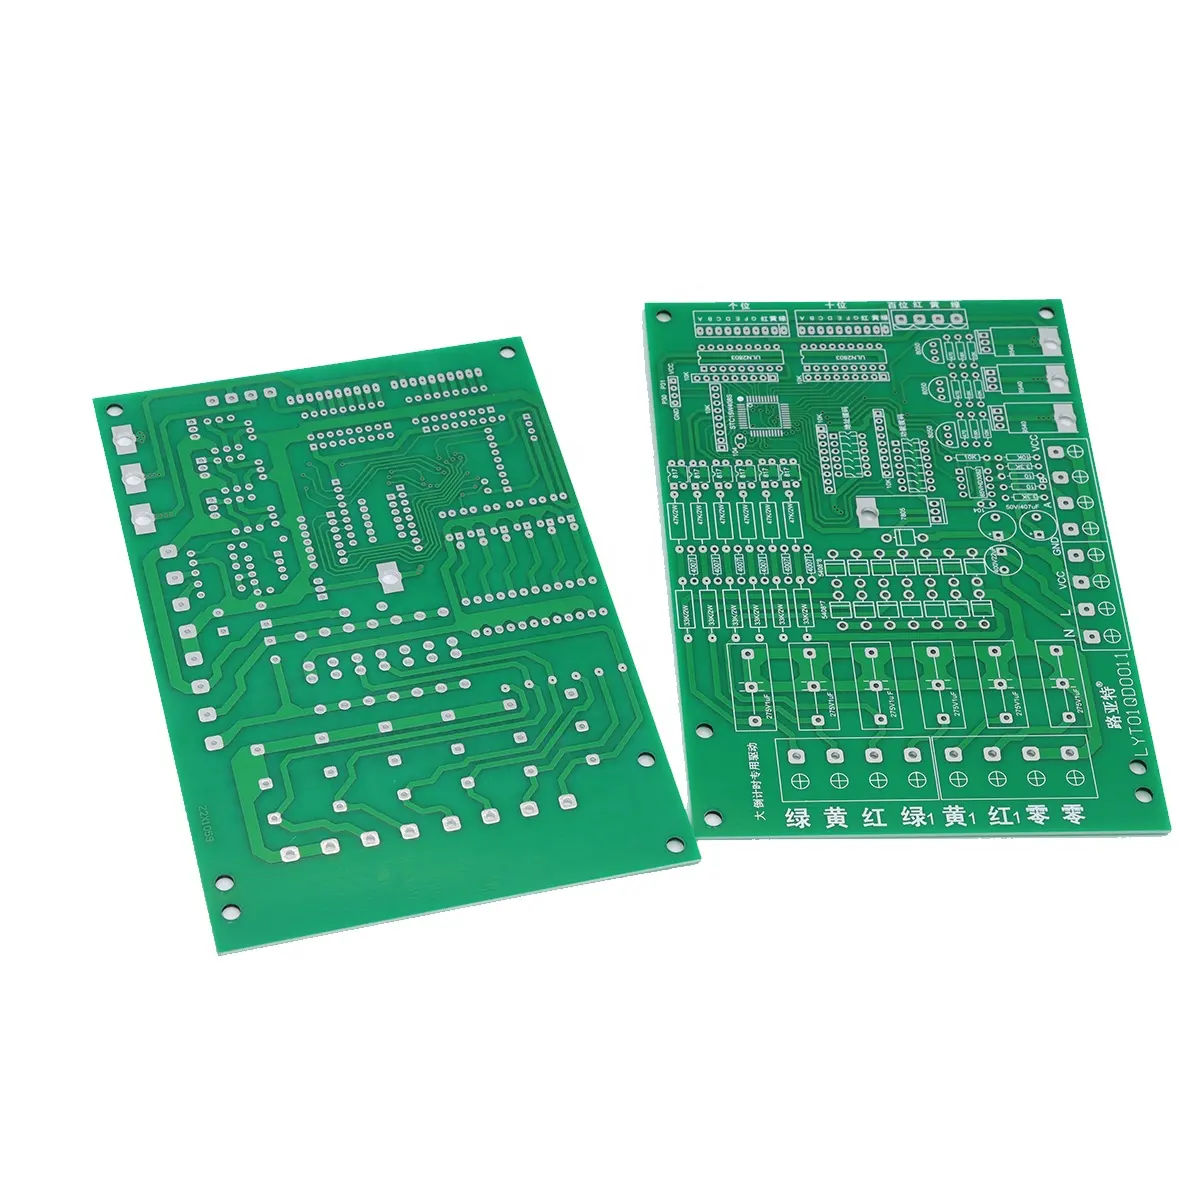 Manufacturing FR4 Double-Sided Printed Circuit Boards For Playstation Washing Machine Heat Pump Boat Controllers PCB